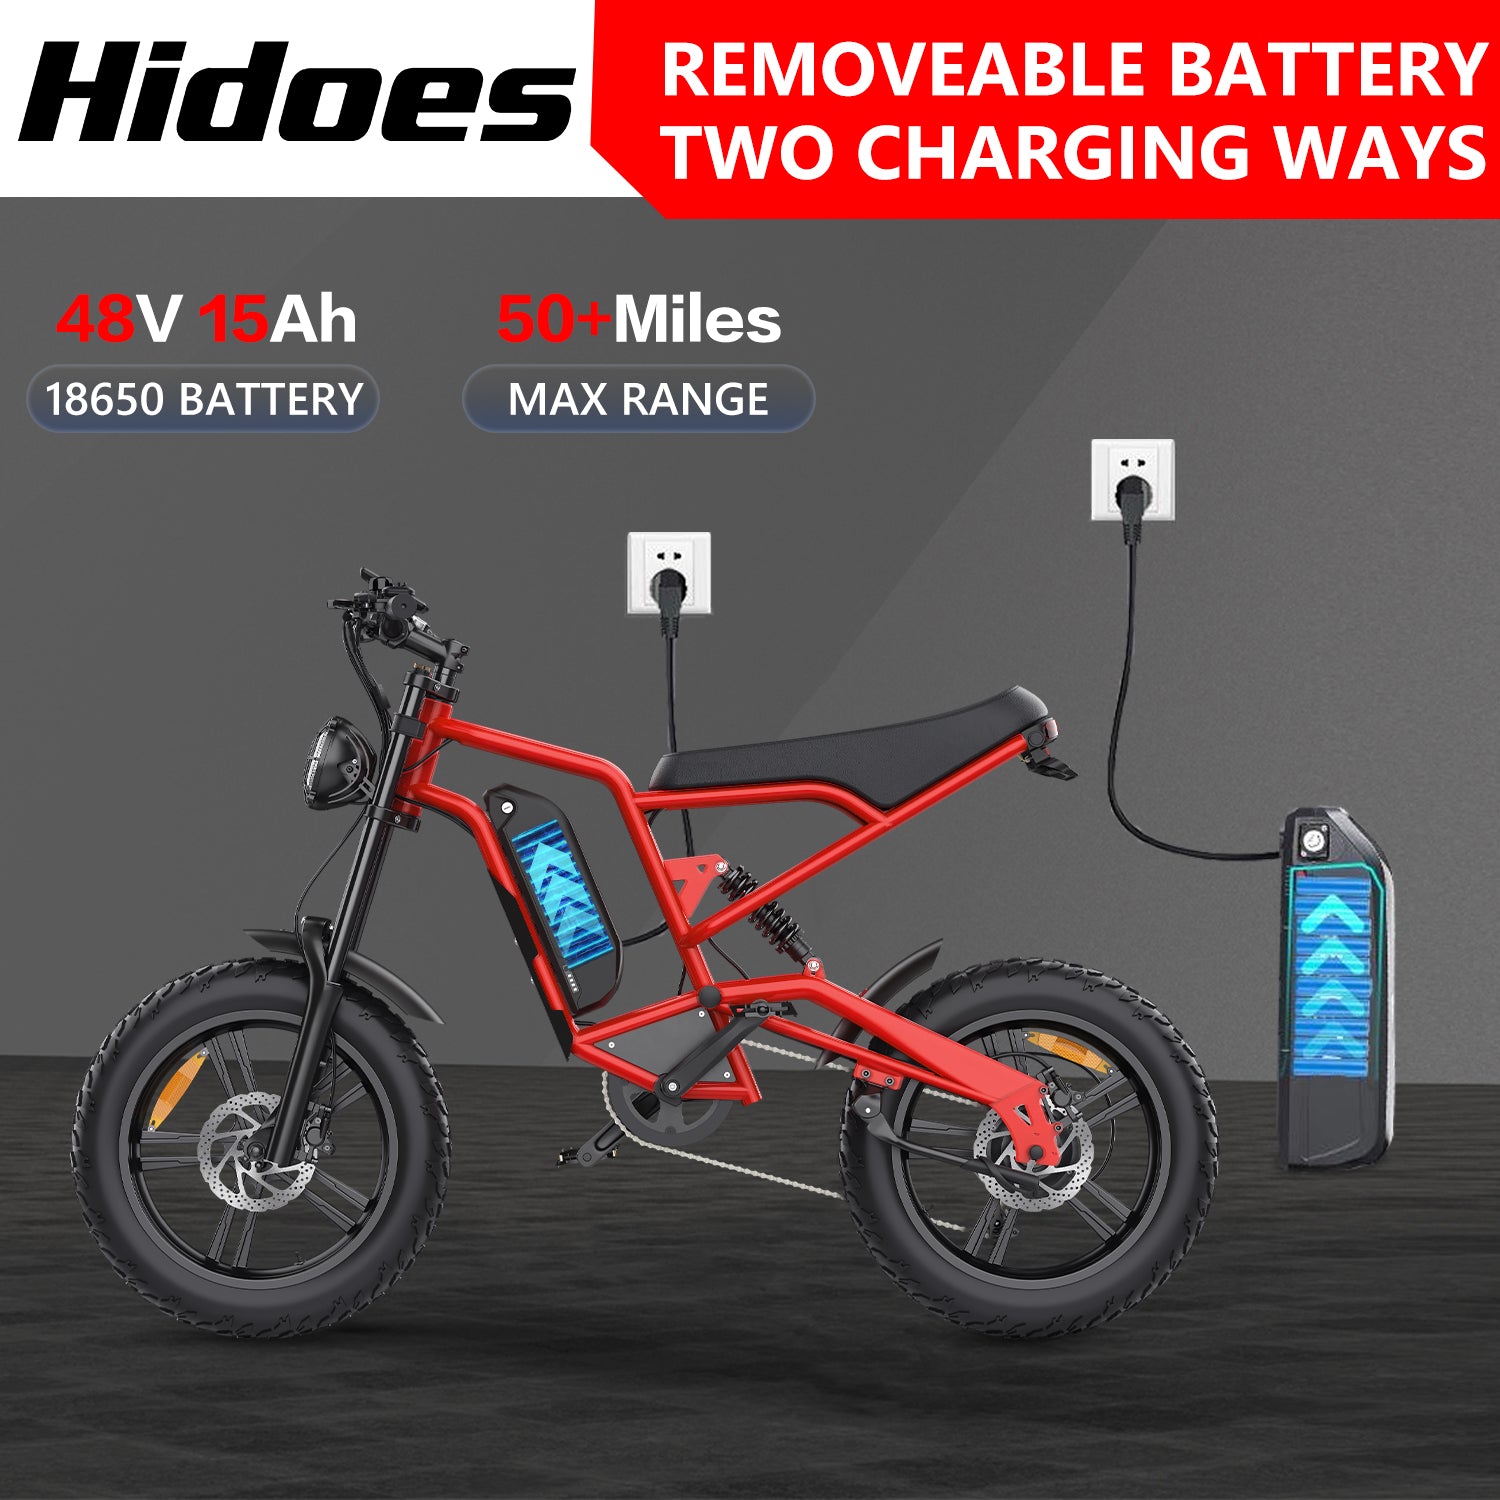 Hidoes B6 fat tire ebike with 48V 15Ah battery, removable battery design, 2 charging ways.